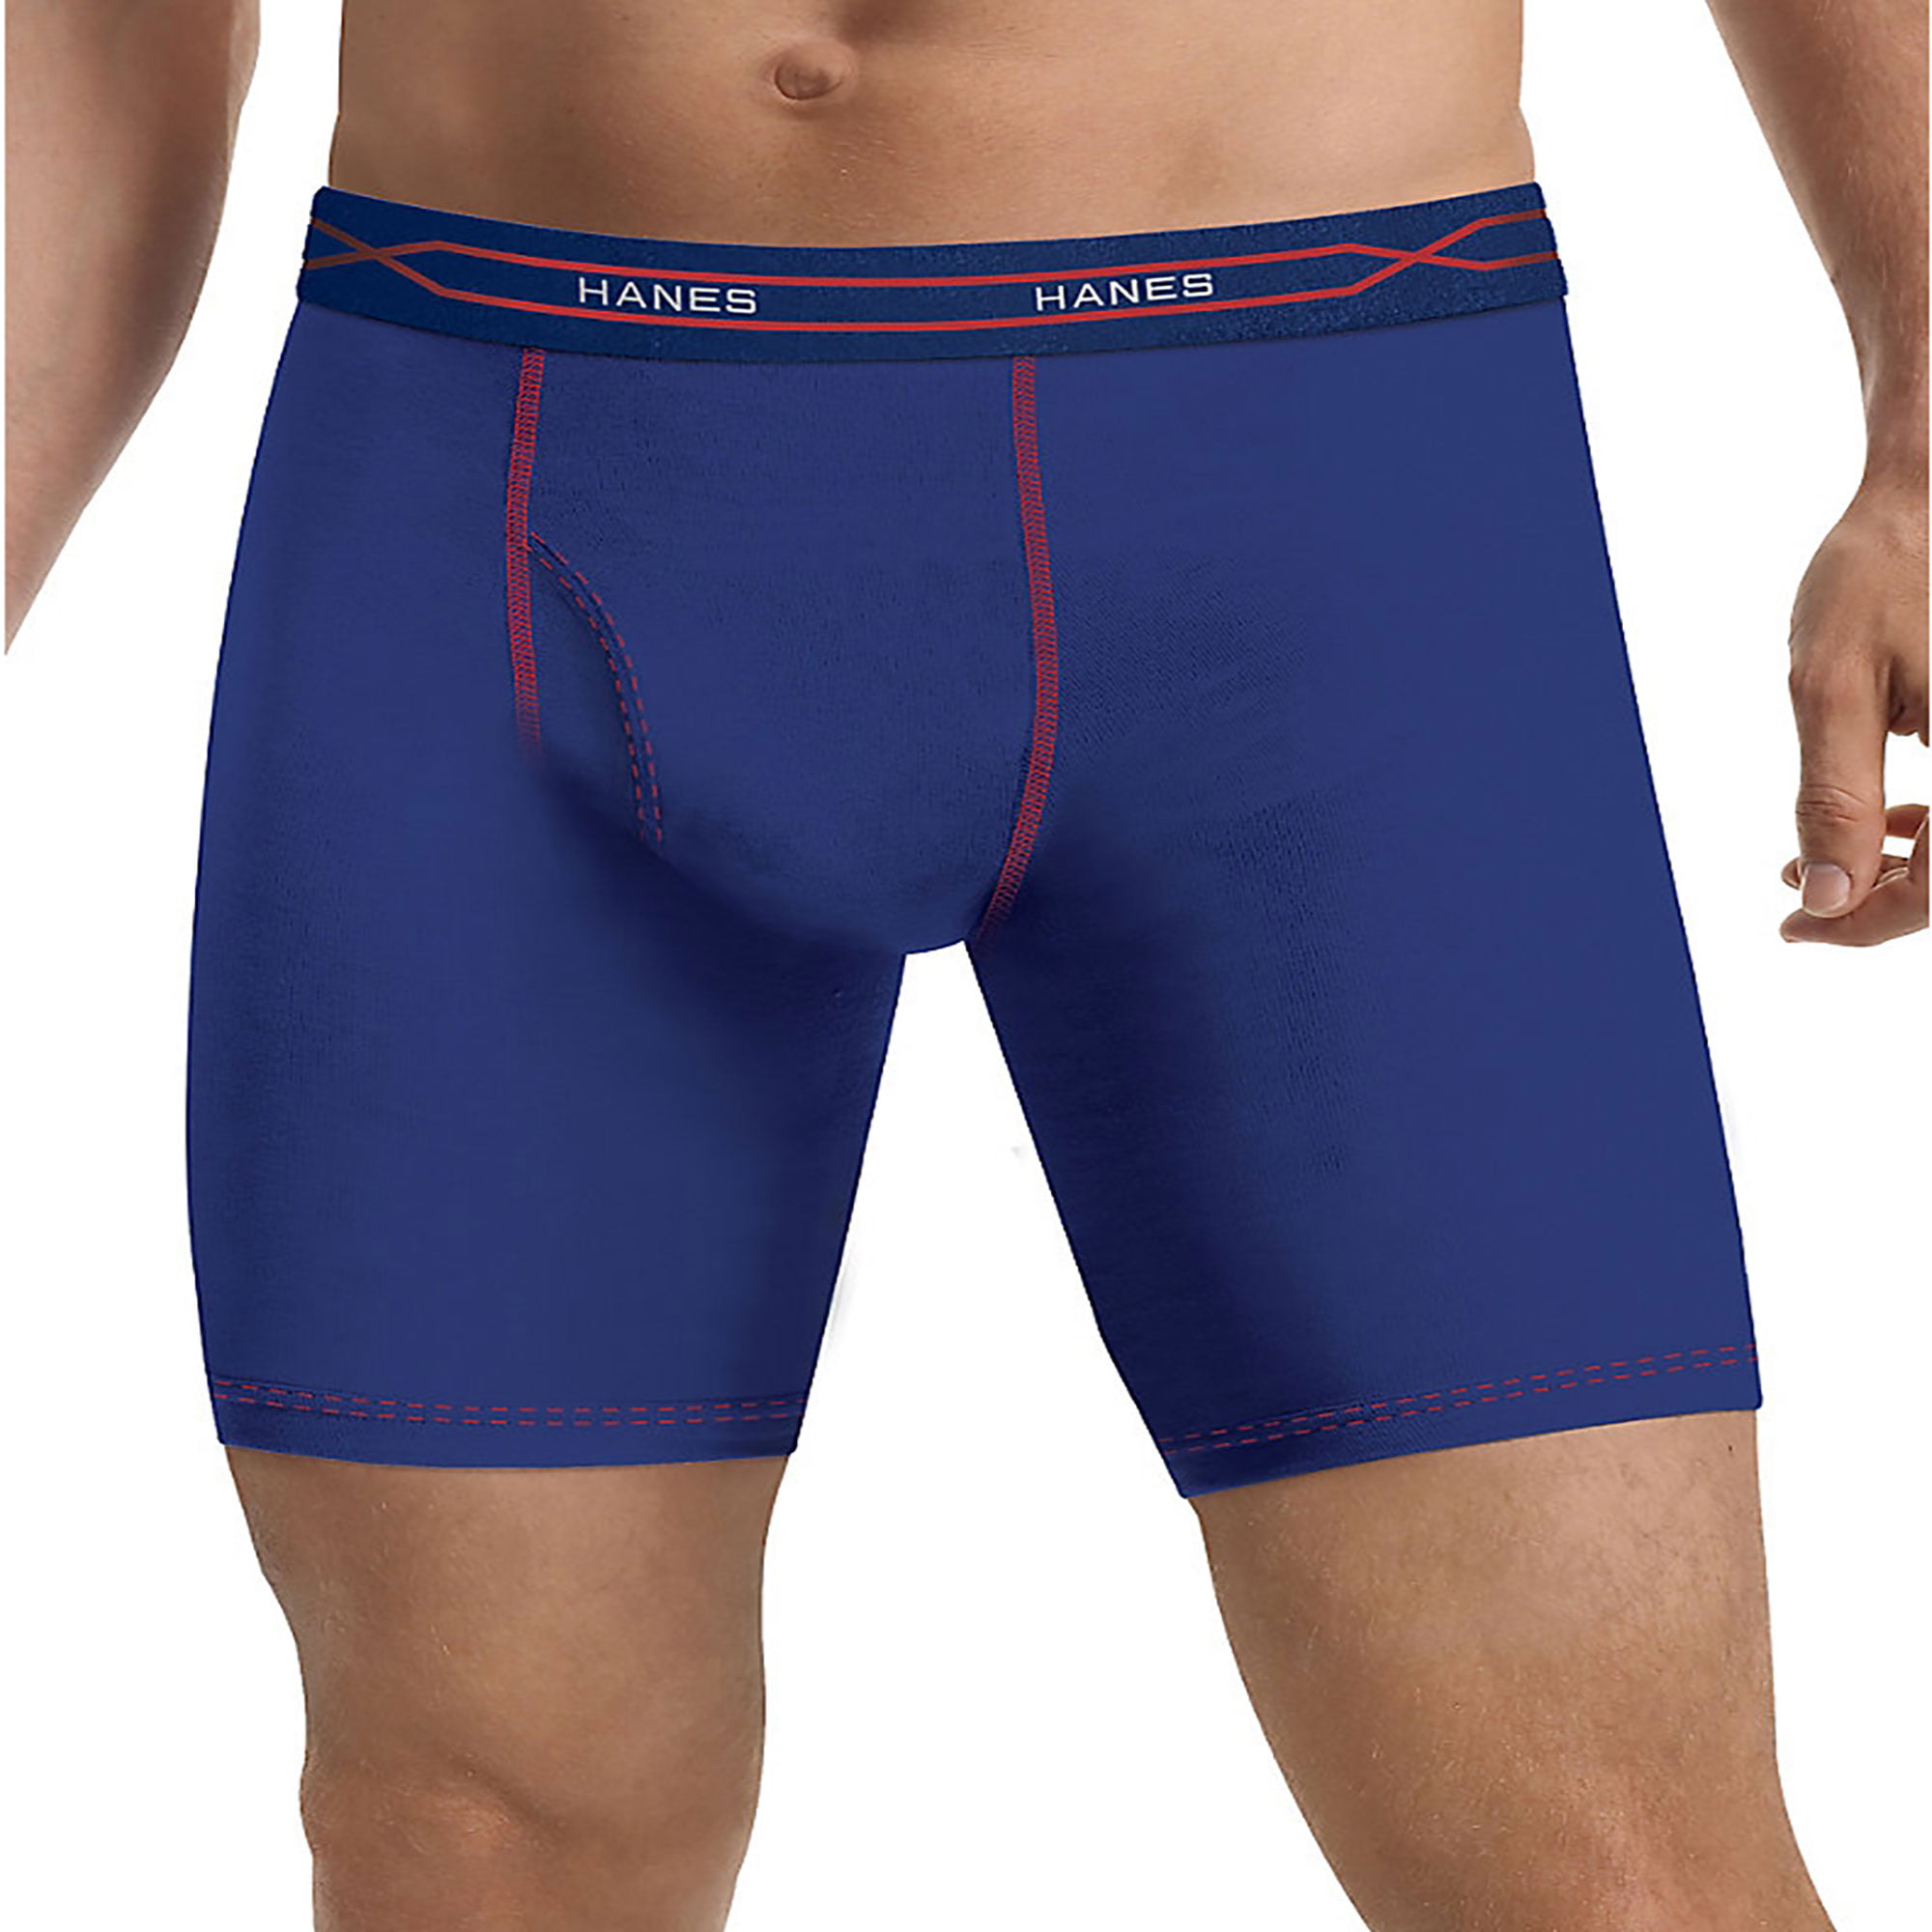 best boxer briefs for men with big butts